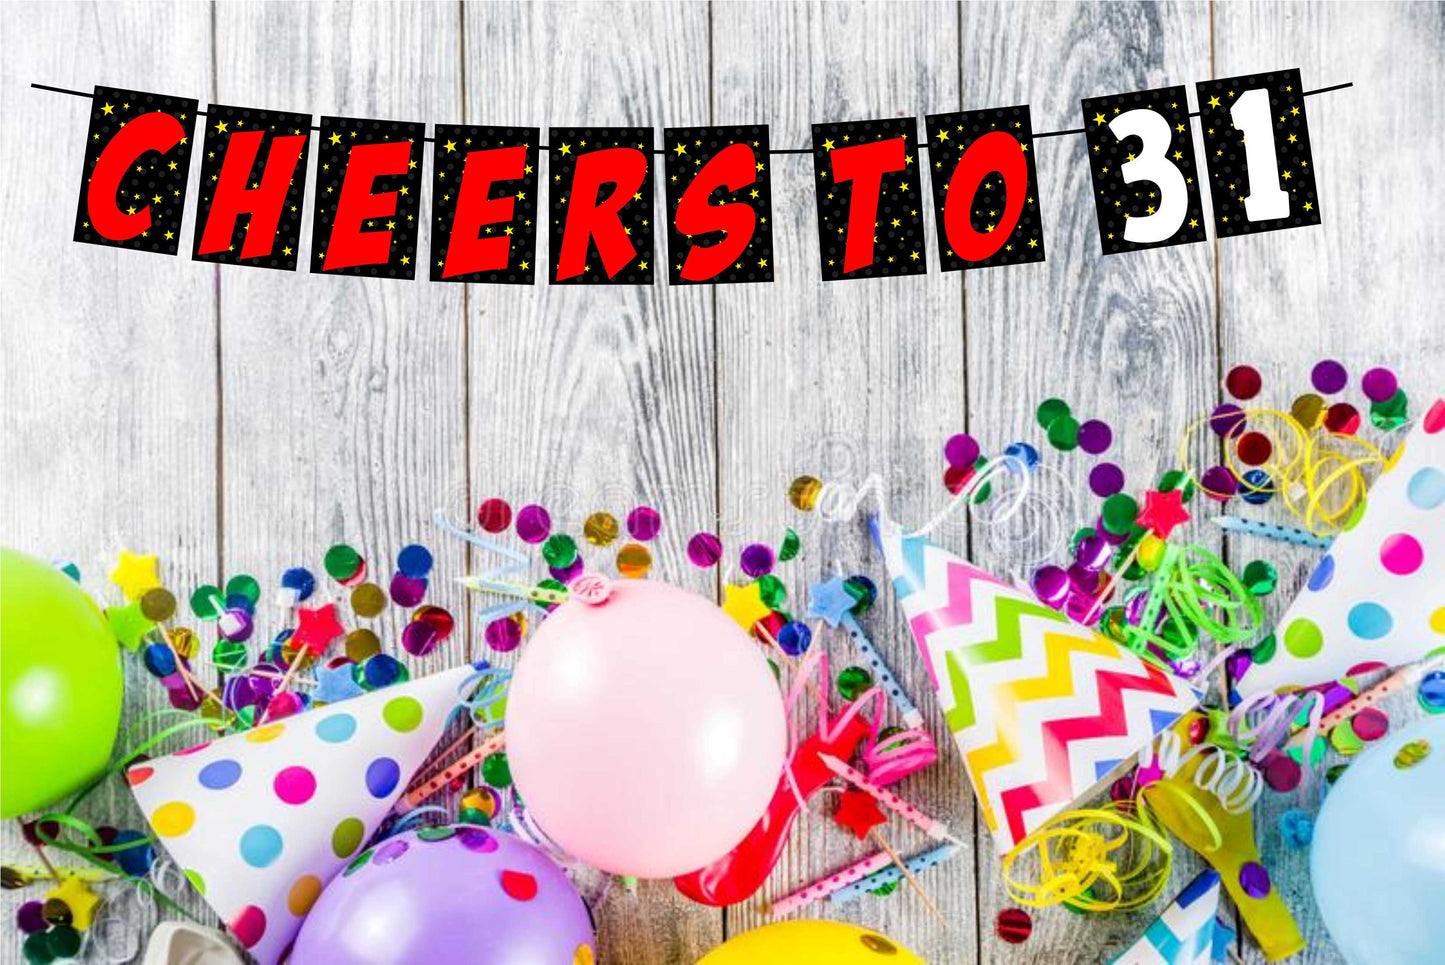 Cheers to 31 Birthday Banner for Photo Shoot Backdrop and Theme Party